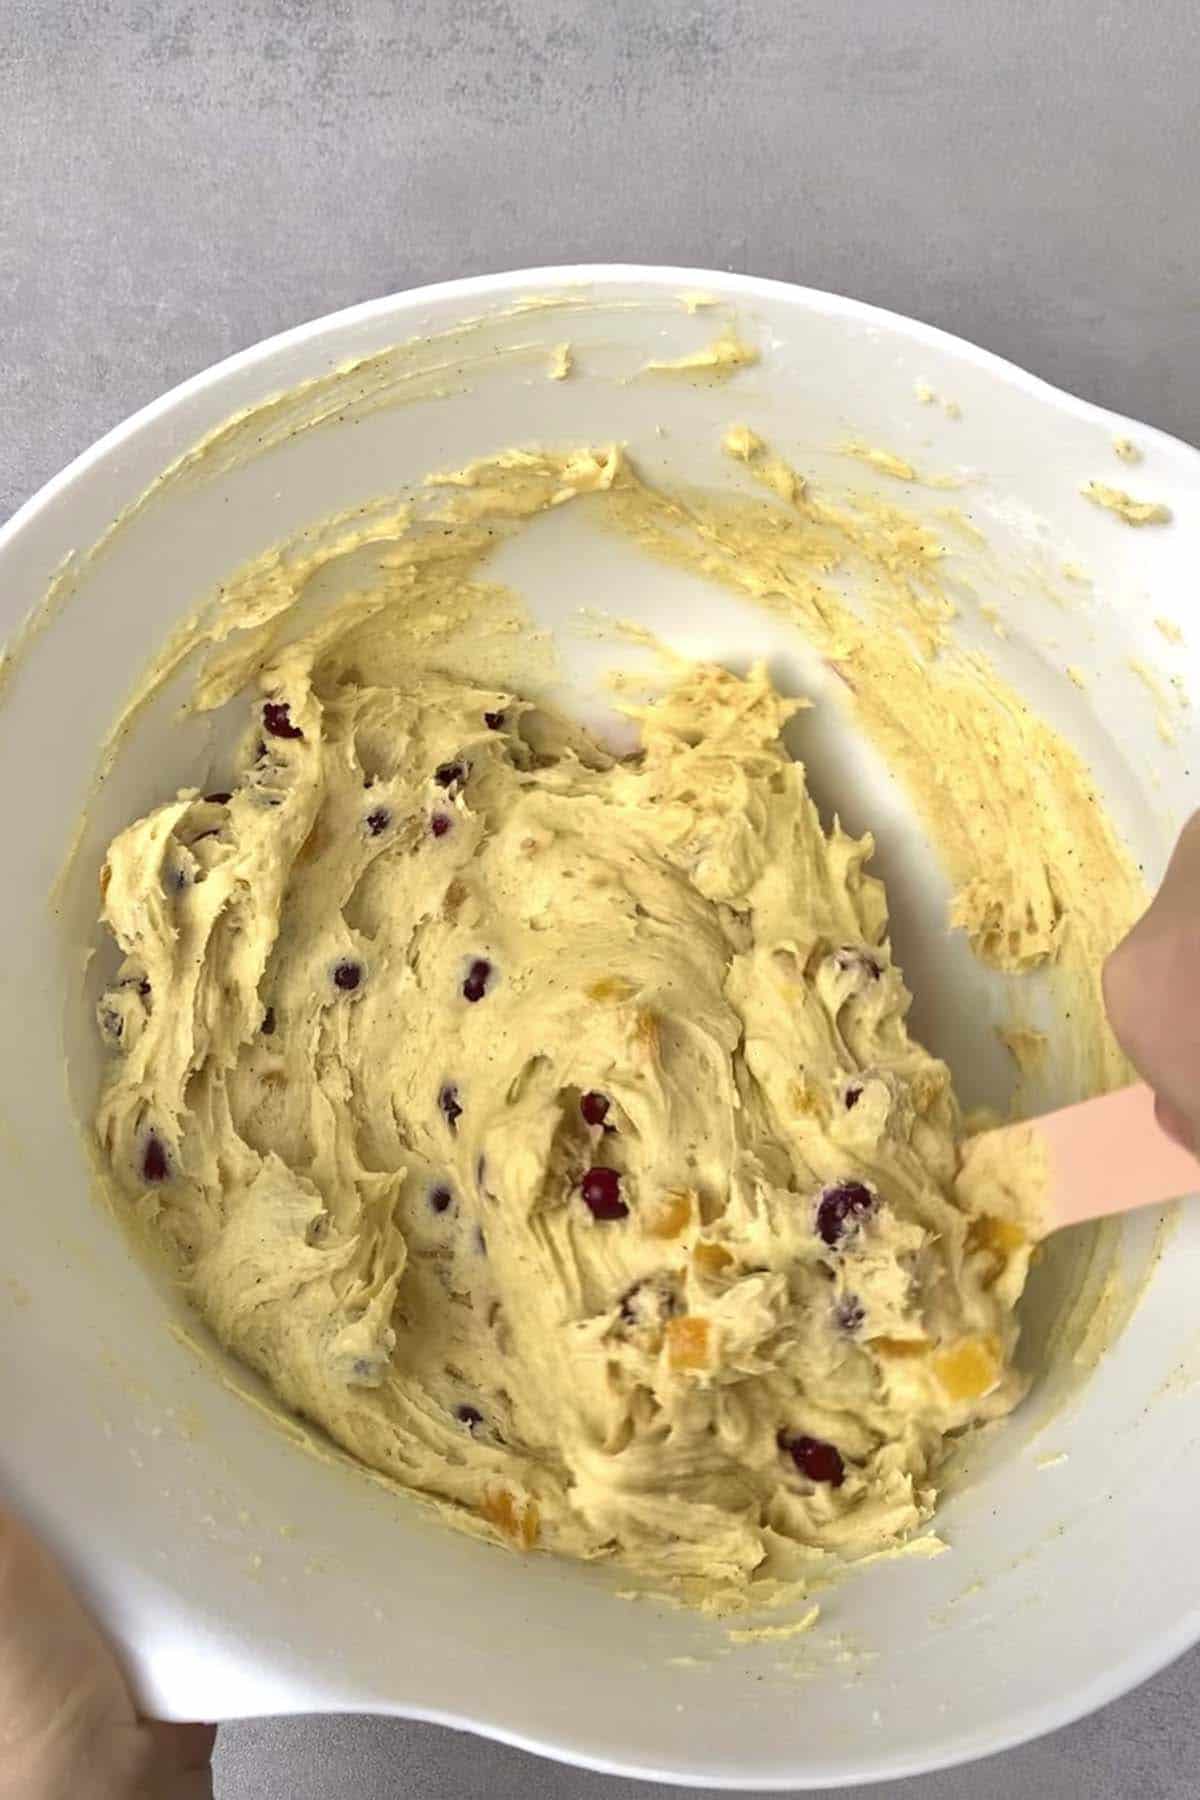 Mixing the ingredients in a bowl with a spatula